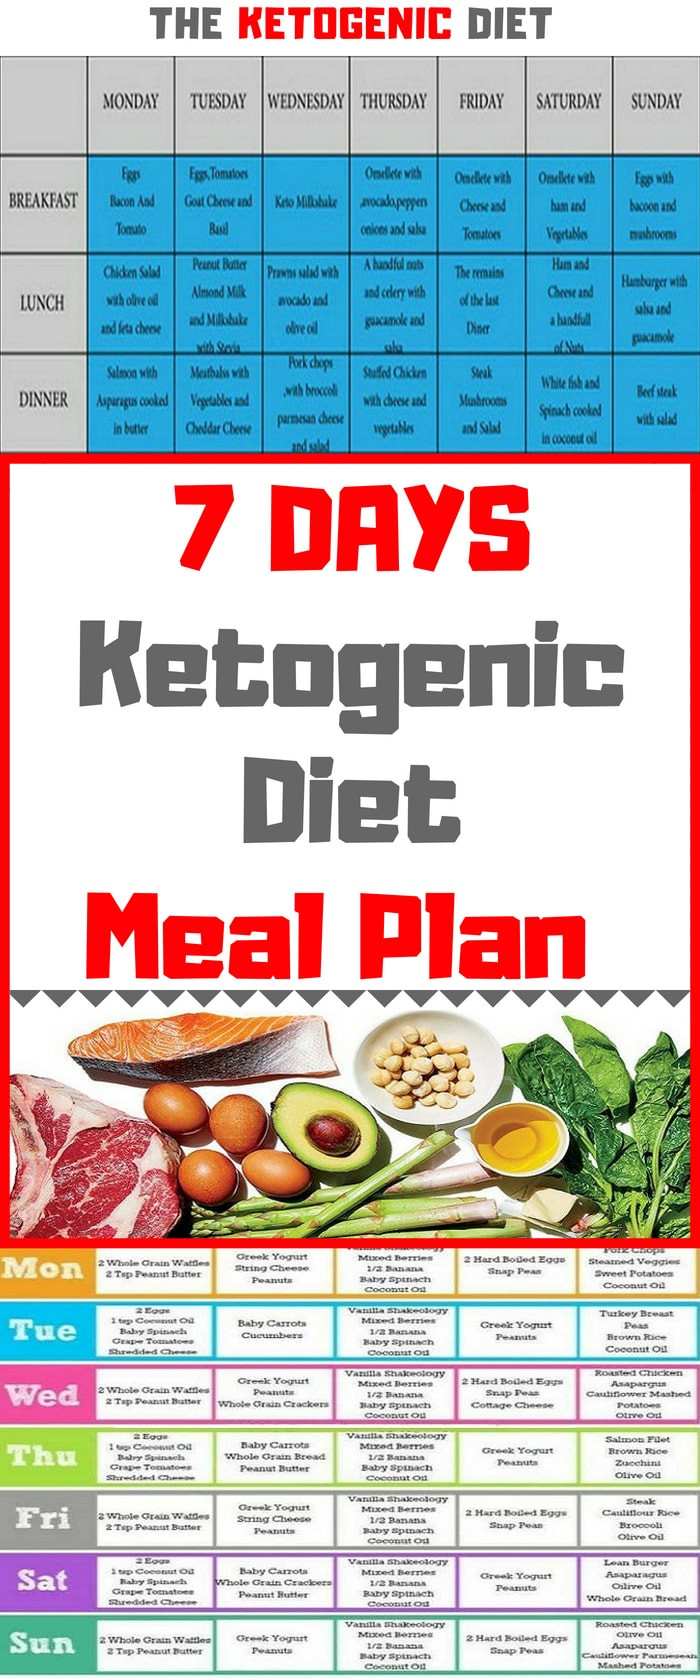 Who Invented The Keto Diet
 1 Week Ketogenic Diet Meal Plan Intended To Fight Heart